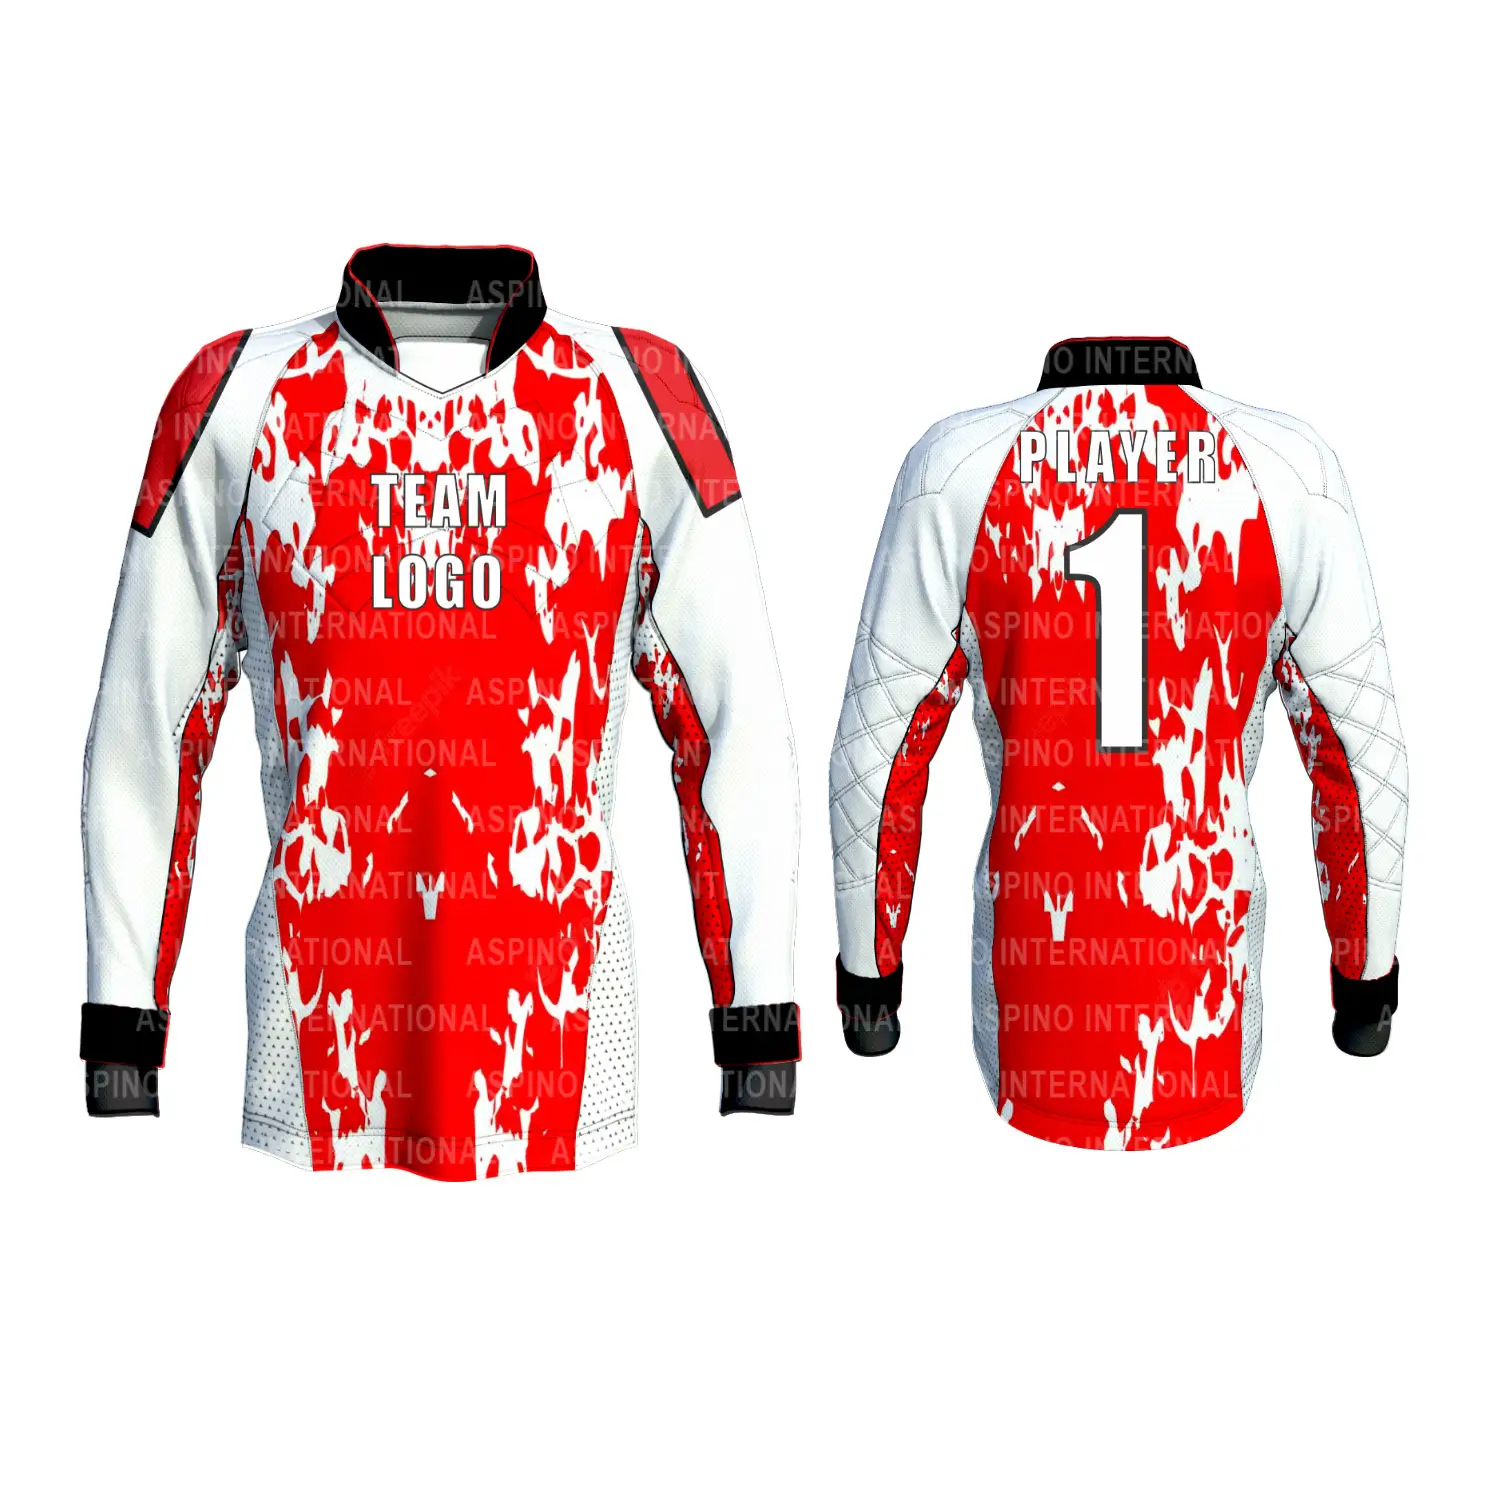 Forearm and Elbow Pads for Aggressive Play Thumb Cuffs Protects Palm and Back Hand Men Women Paintball Jerseys